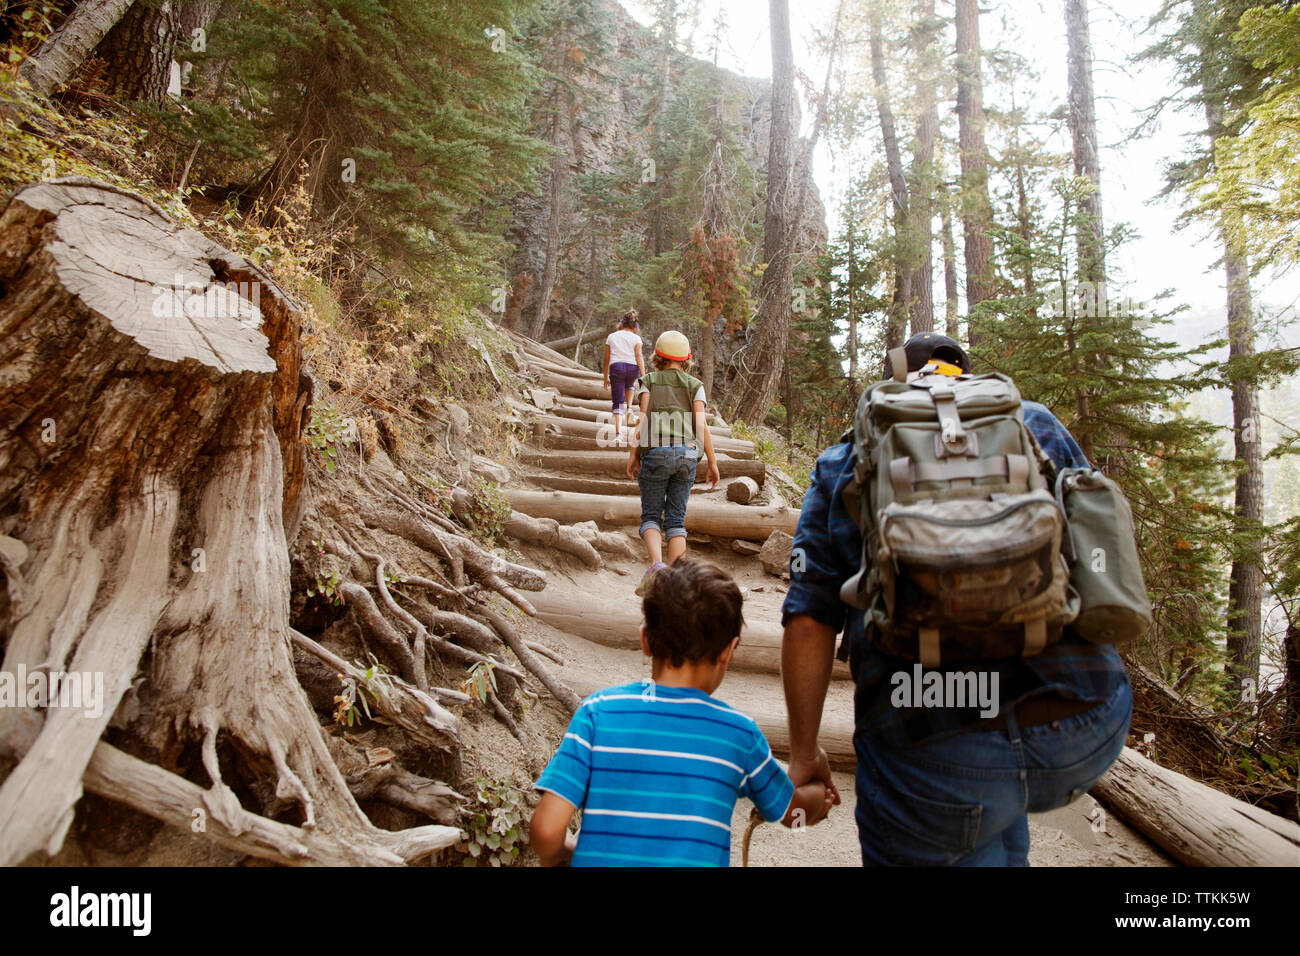 Rear view of family climbing steps amidst trees in forest Stock Photo